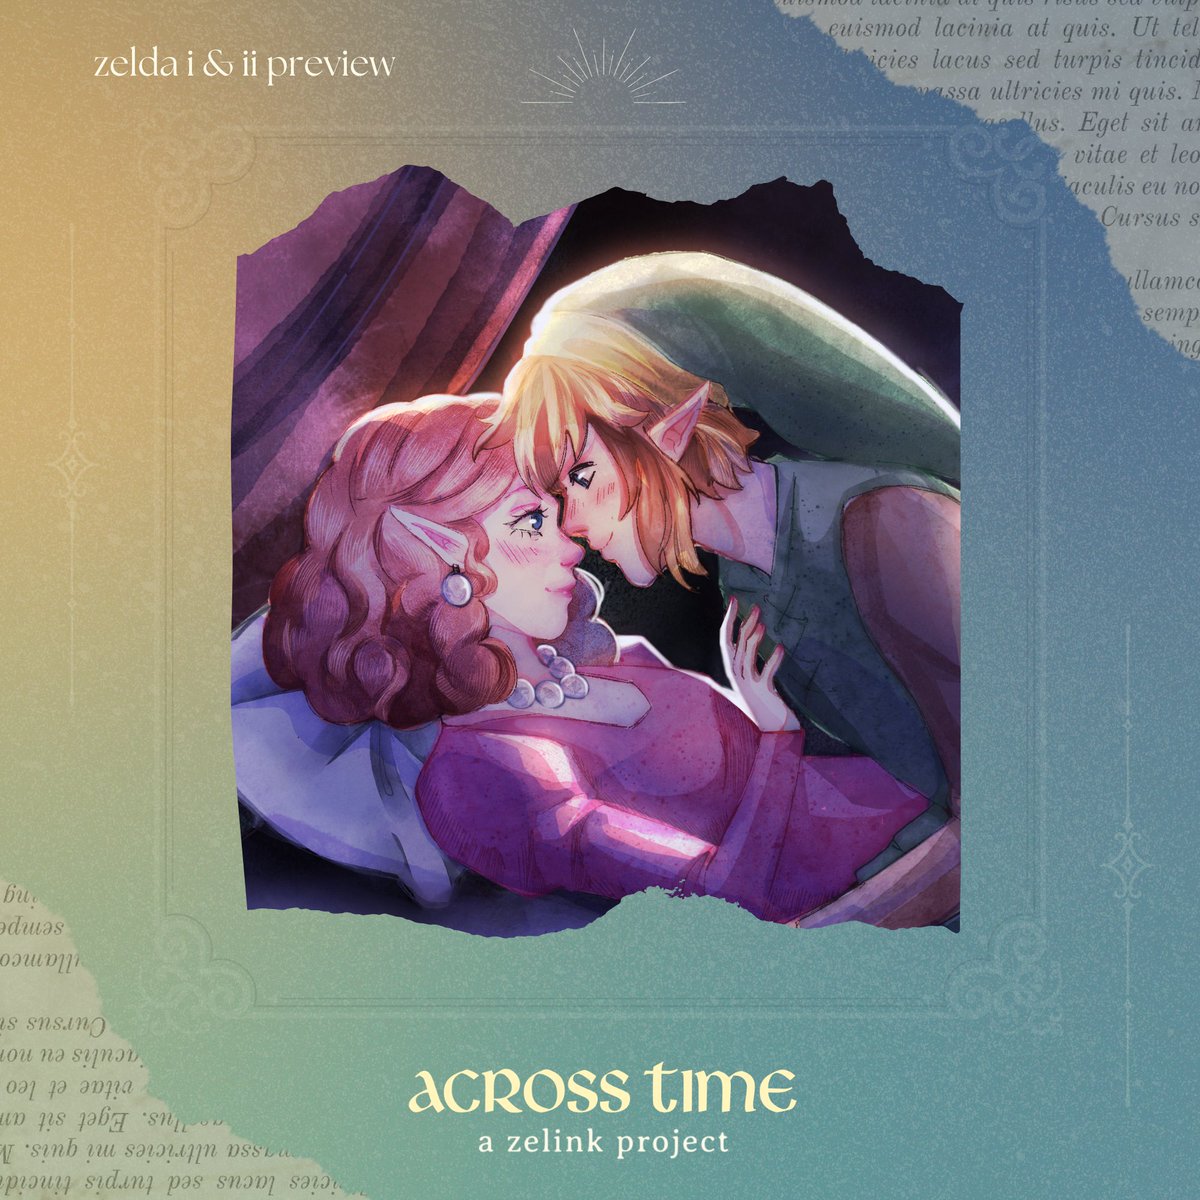 💚🩵 Artist Preview: The Legend of Zelda 🩵💚

Only true love’s kiss can wake the sleeping Princess—that's how you’ll feel when you see @hylianzs’s full illustration during our event in June!

#TheLegendofZelda #Zelink #AcrossTime